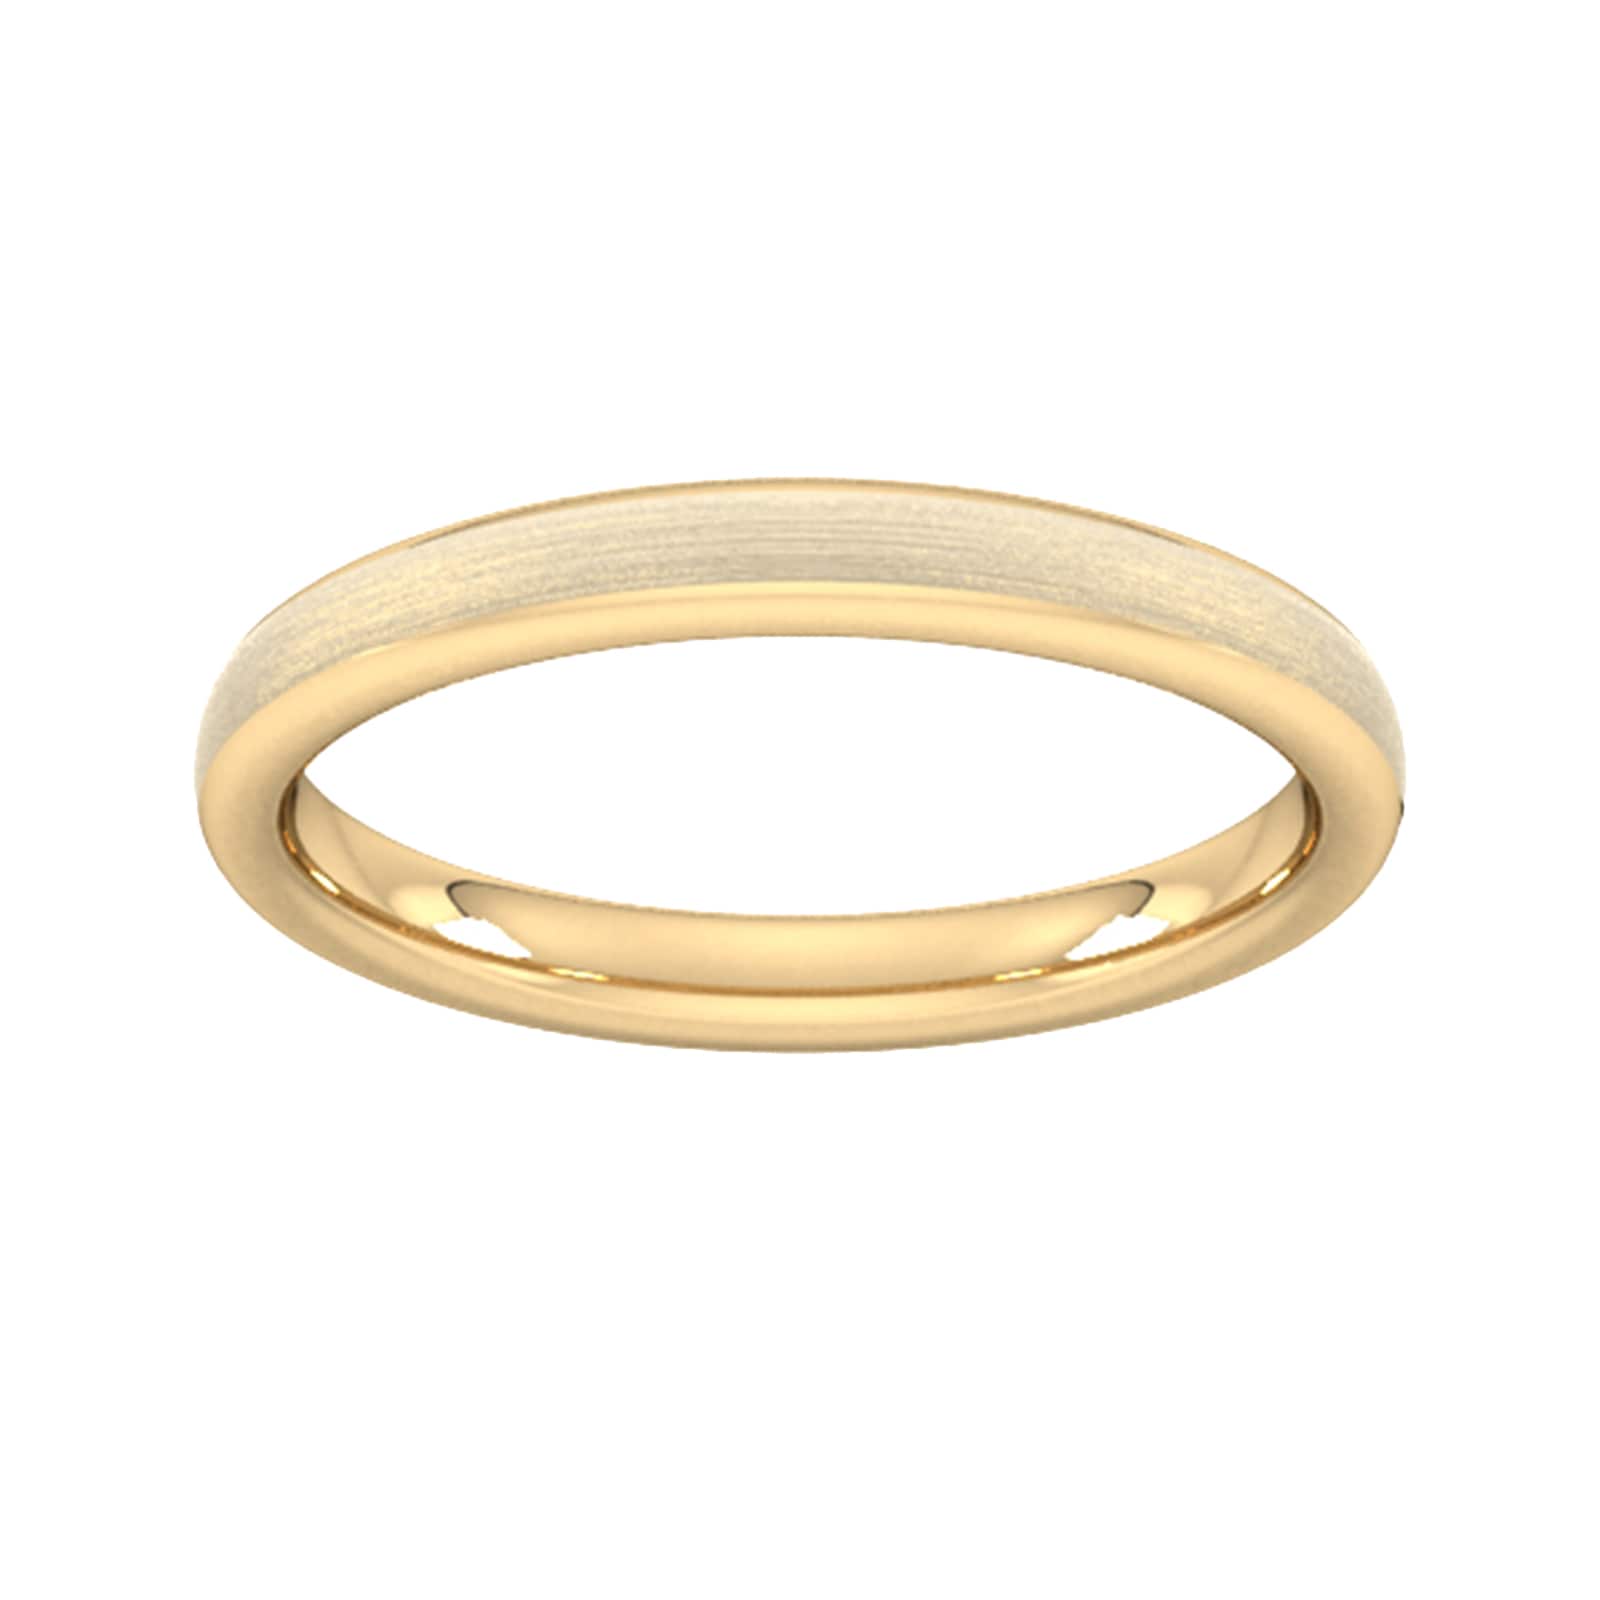 2.5mm Traditional Court Standard Matt Finished Wedding Ring In 9 Carat Yellow Gold - Ring Size S